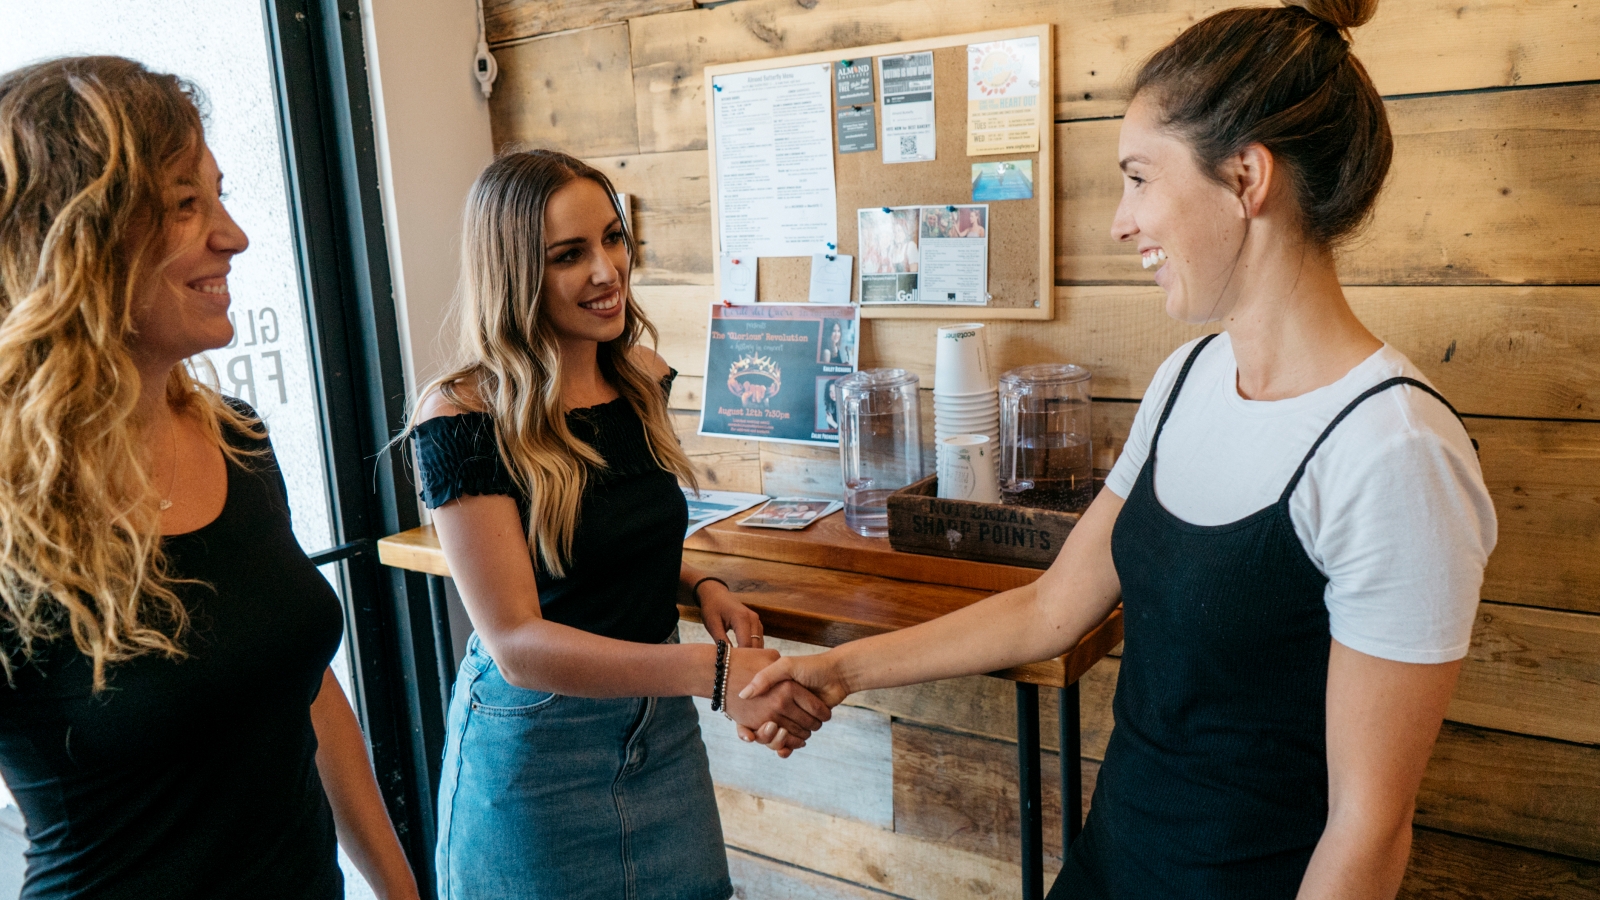 Host in a coffee shop greeting two guests and shaking hands with one of them